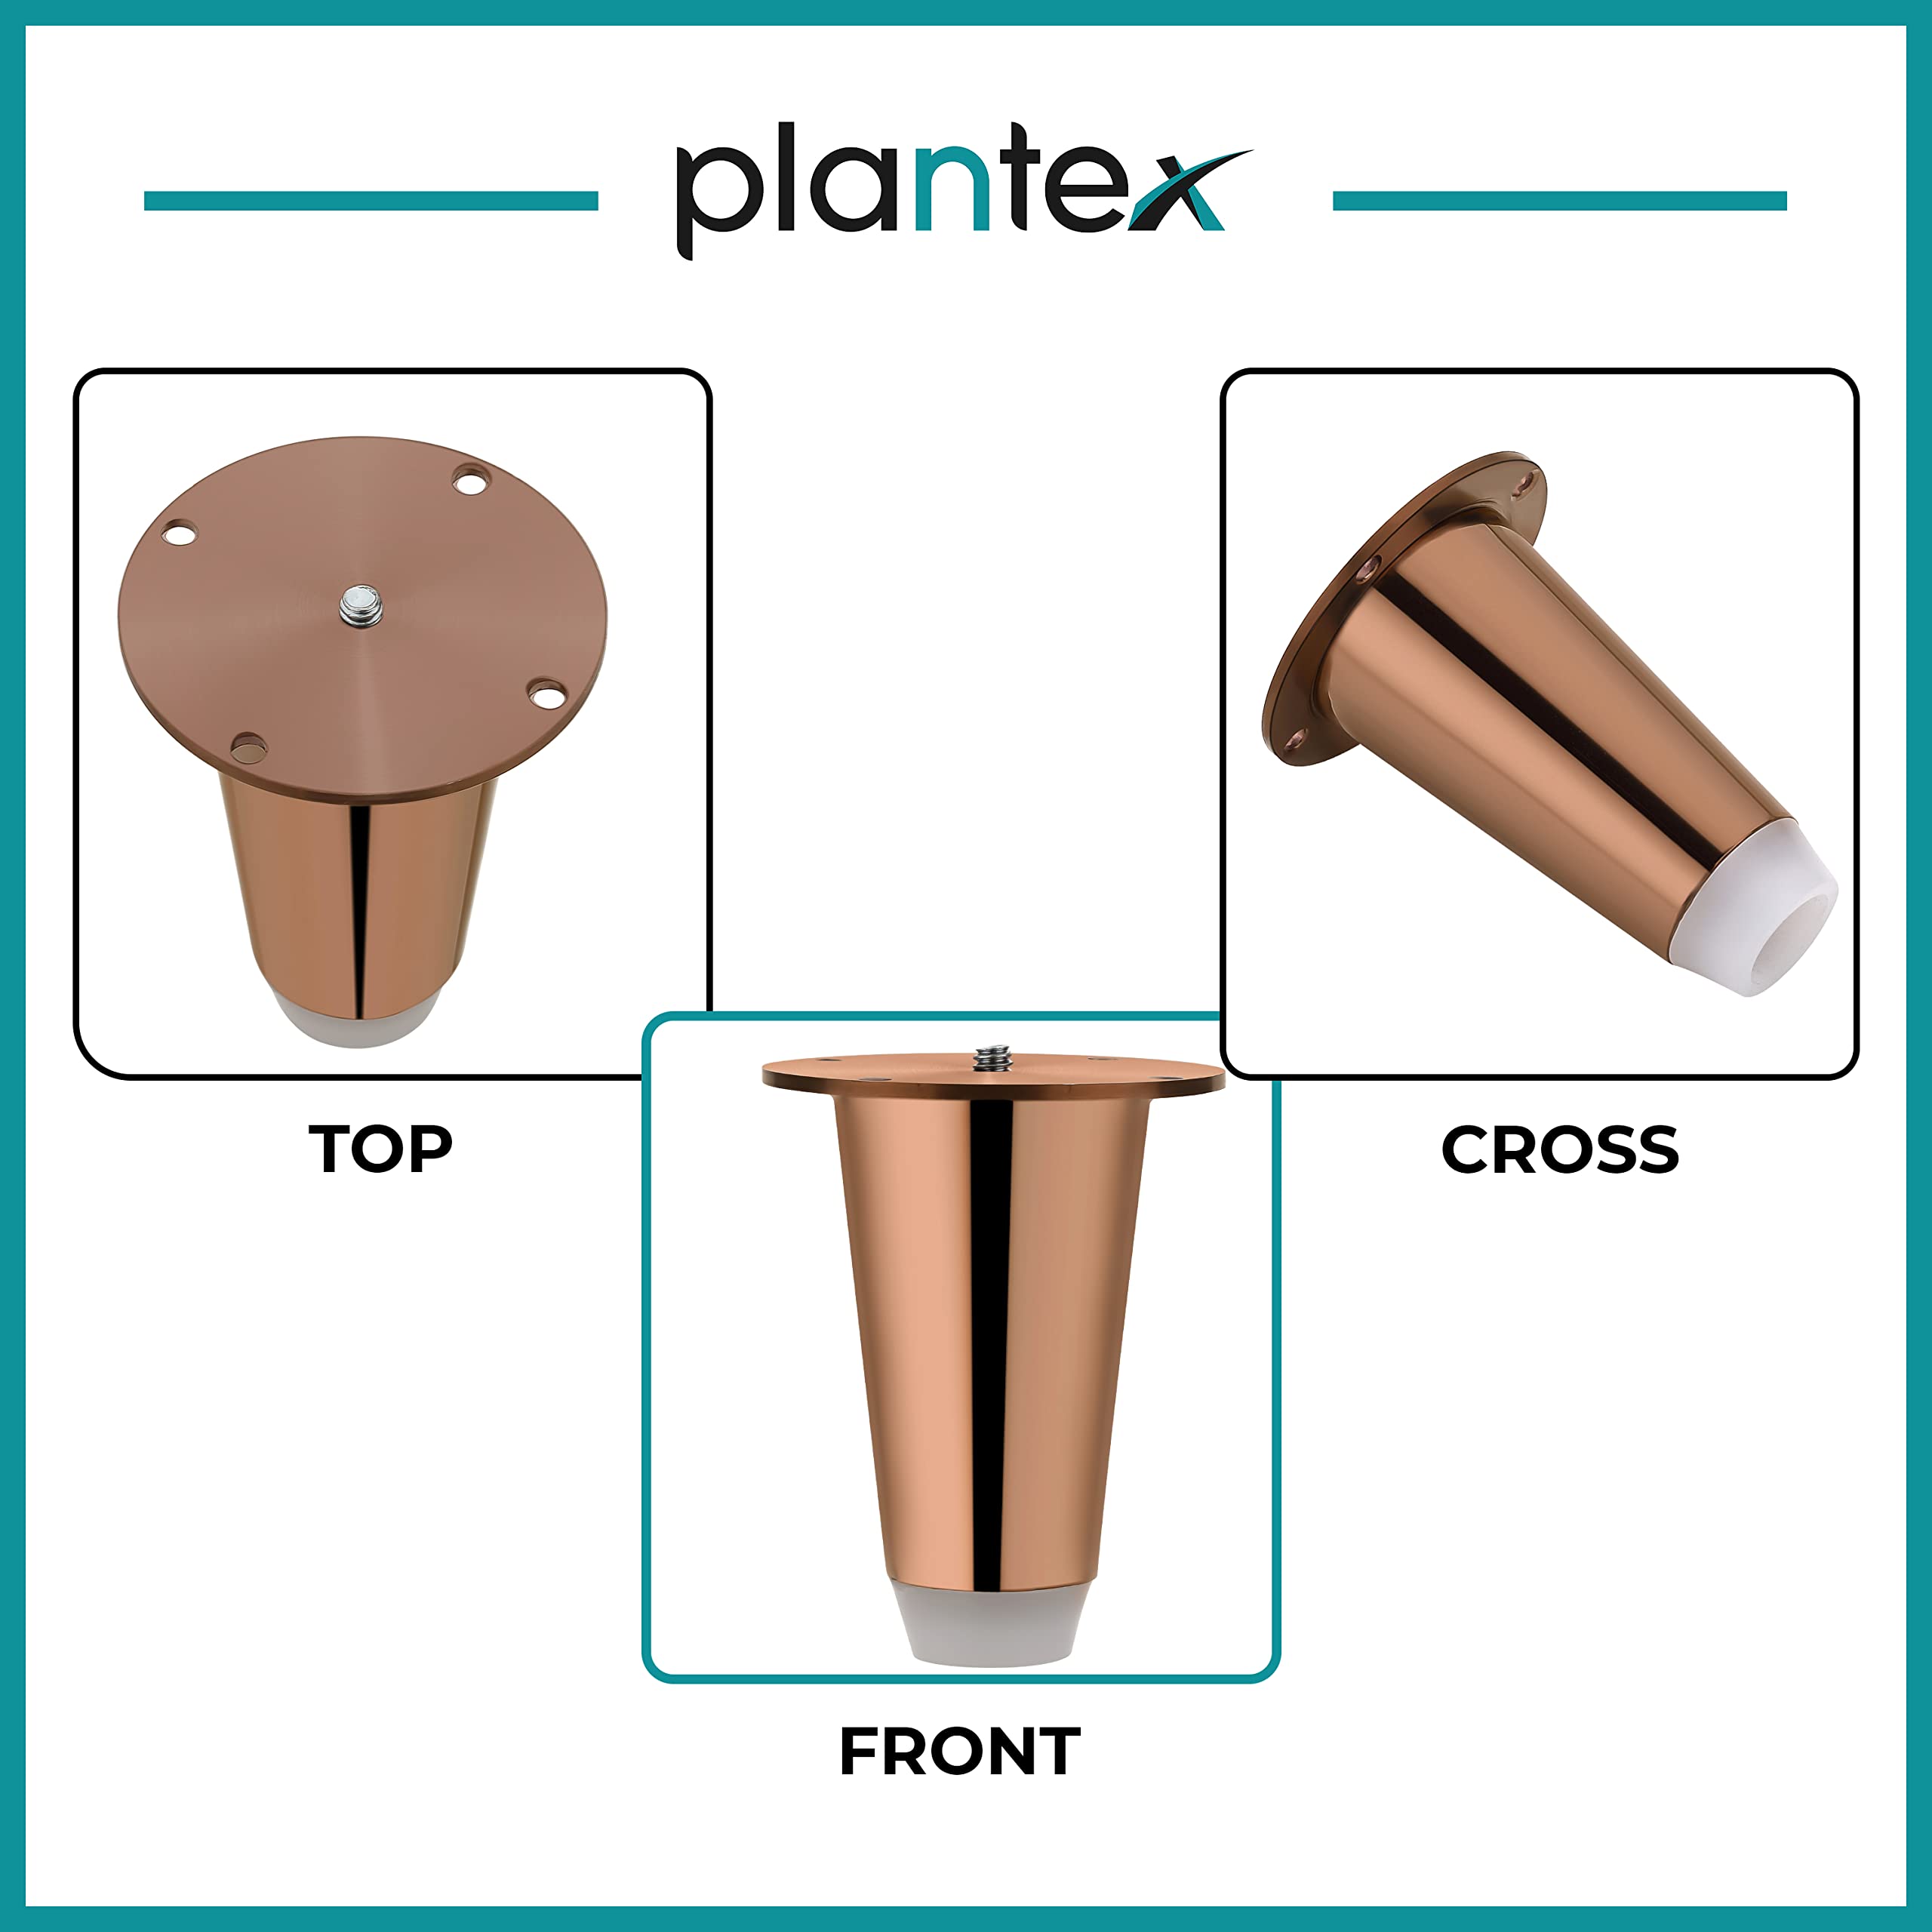 Plantex Heavy Duty Stainless Steel 4 inch Sofa Leg/Bed Furniture Leg Pair for Home Furnitures (DTS-53, Rose Gold) – 6 pcs